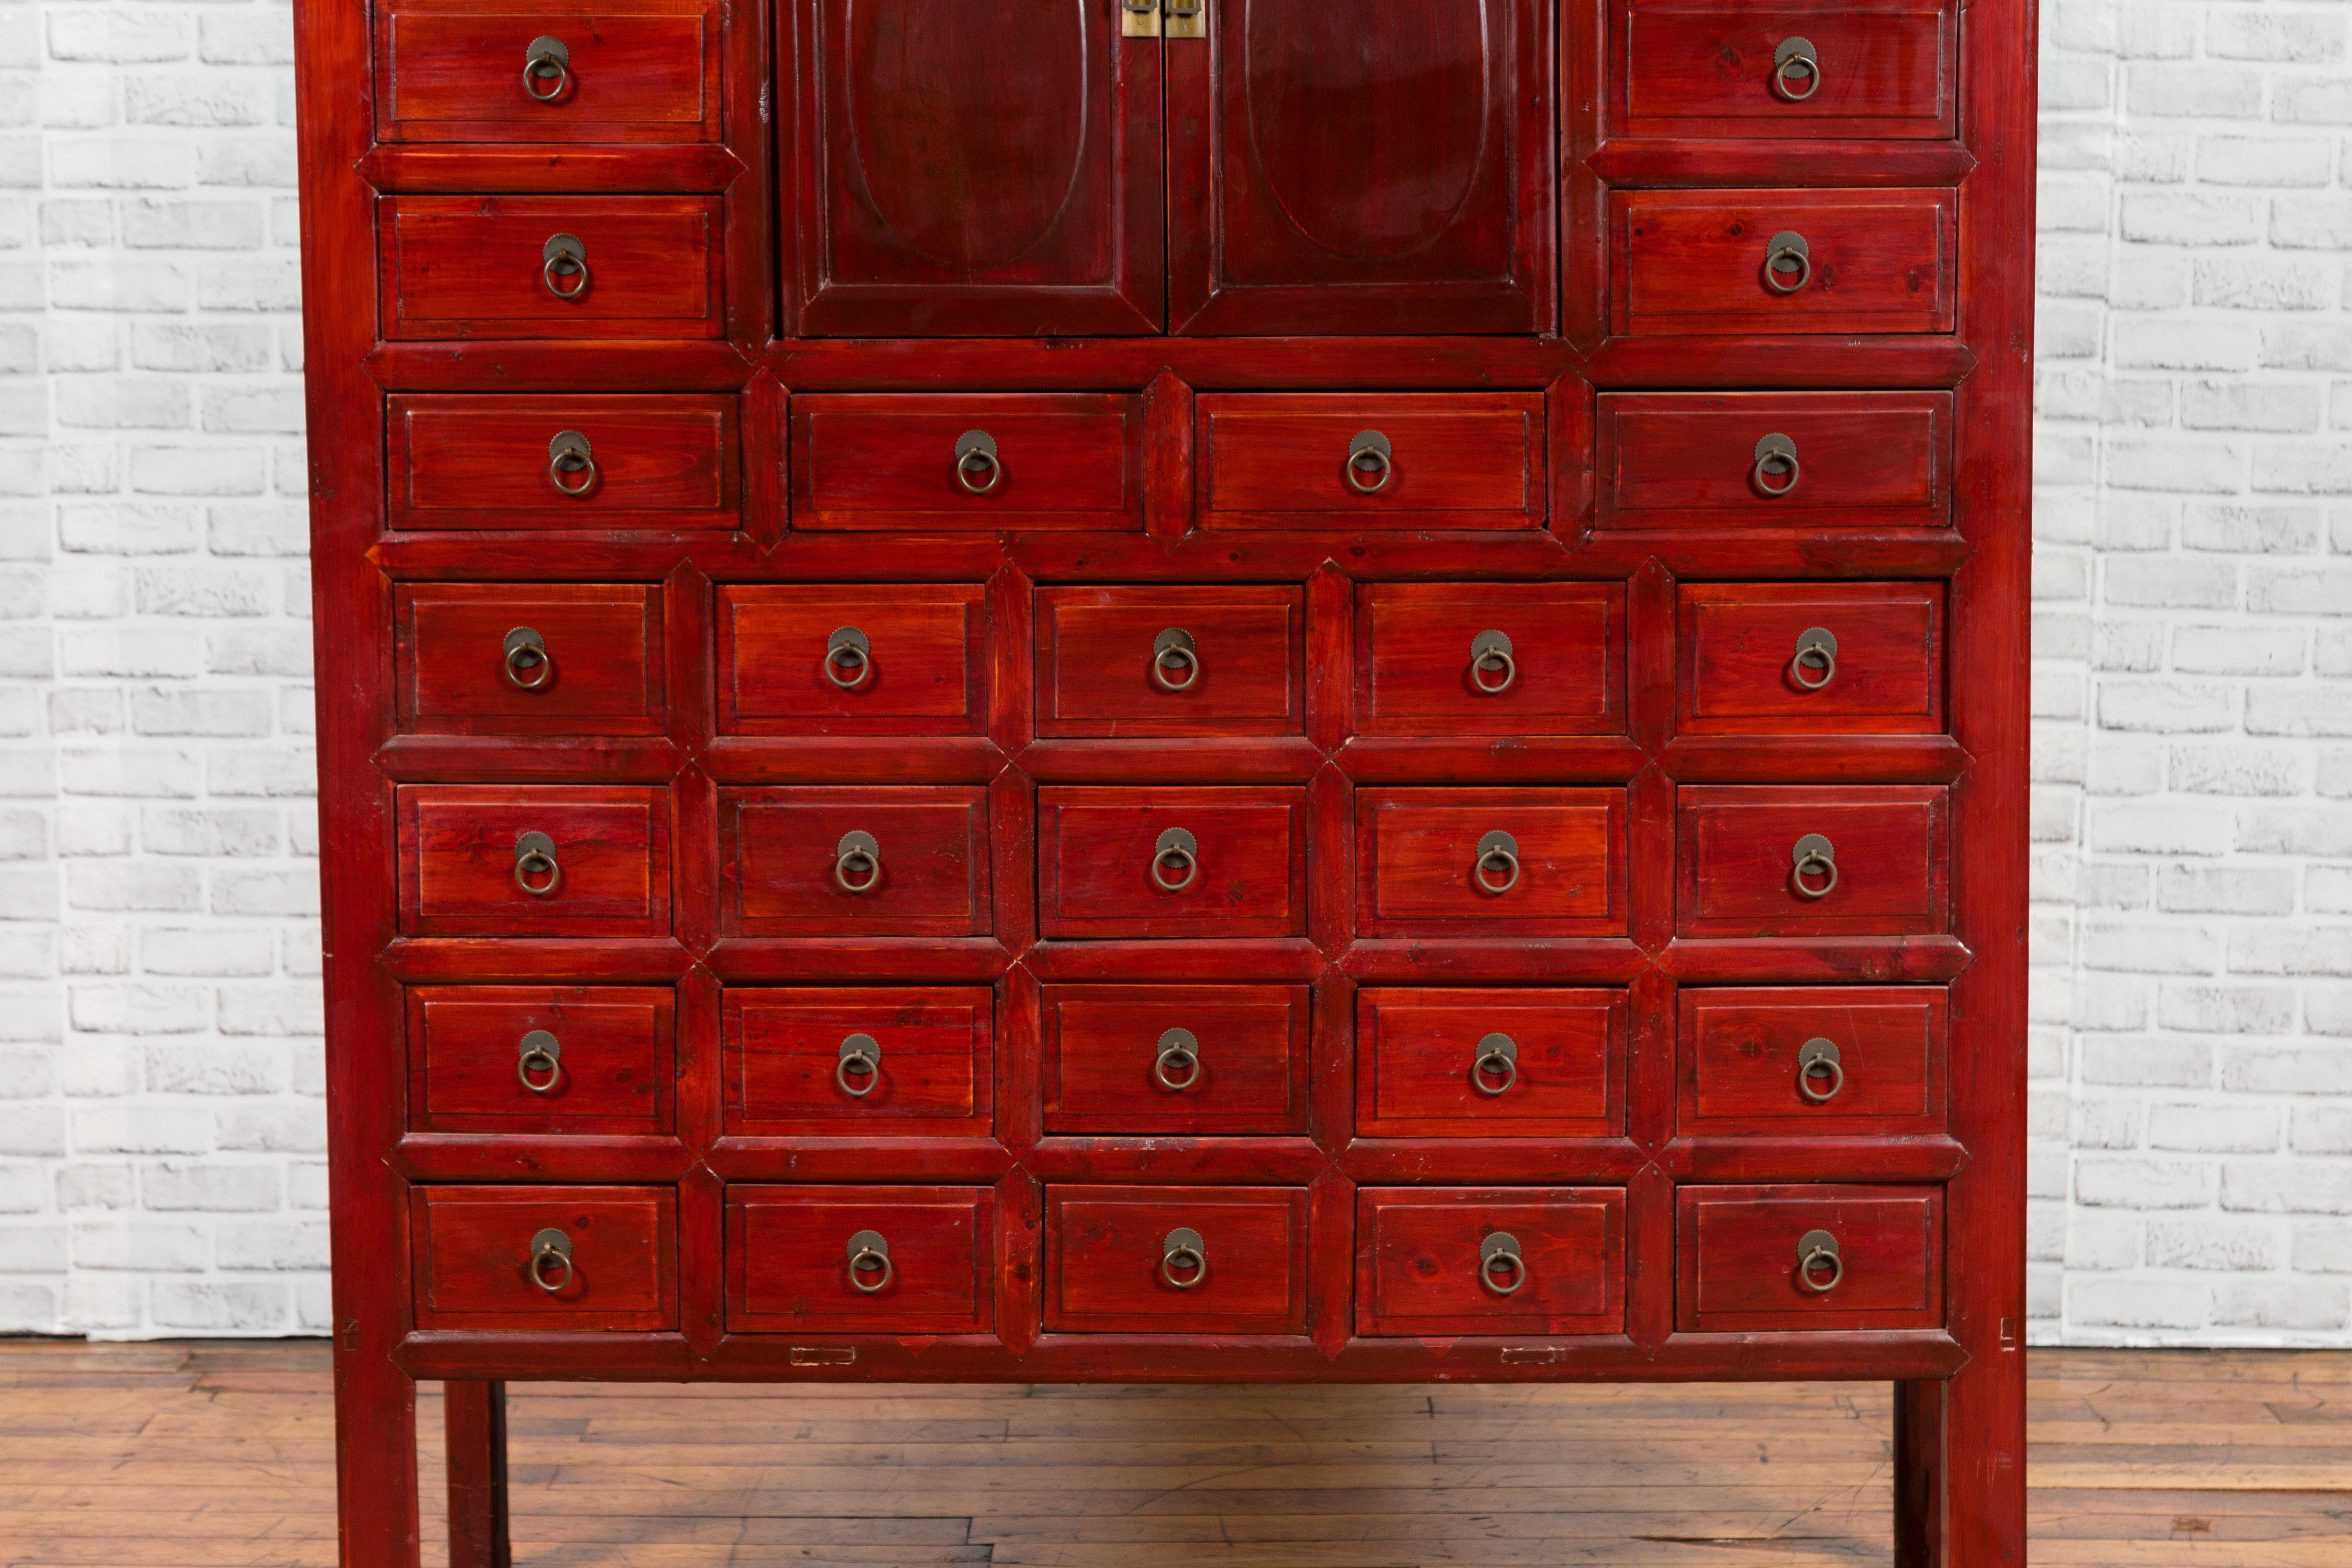 Chinese 1930s Red Lacquered Apothecary Cabinet with 32 Drawers and Carved Panels In Good Condition For Sale In Yonkers, NY